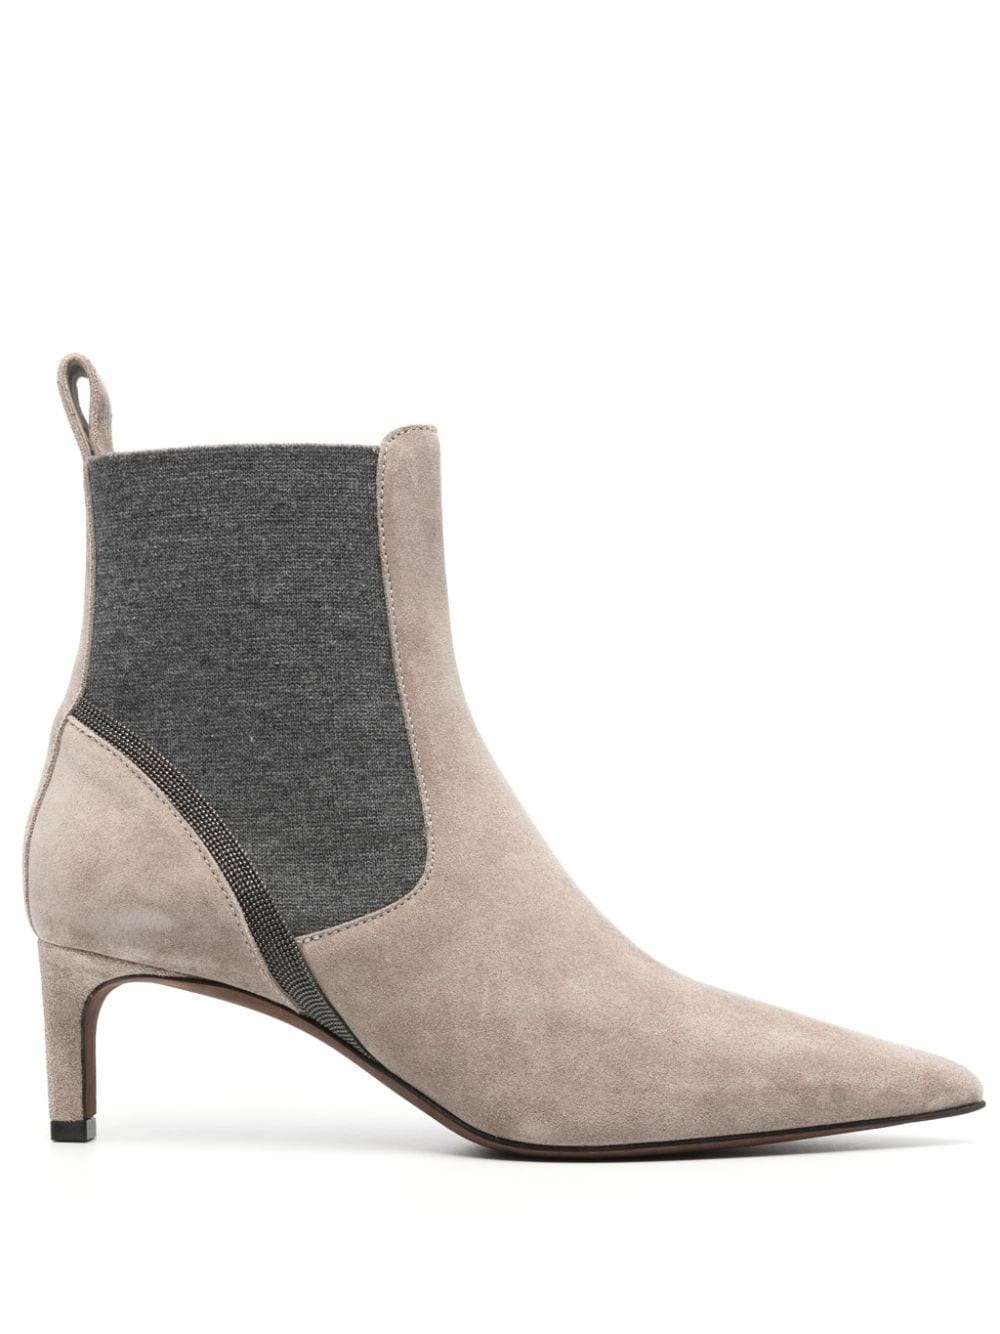 BRUNELLO CUCINELLI SUEDE HEELED BOOTS WITH SHINY CONTOUR